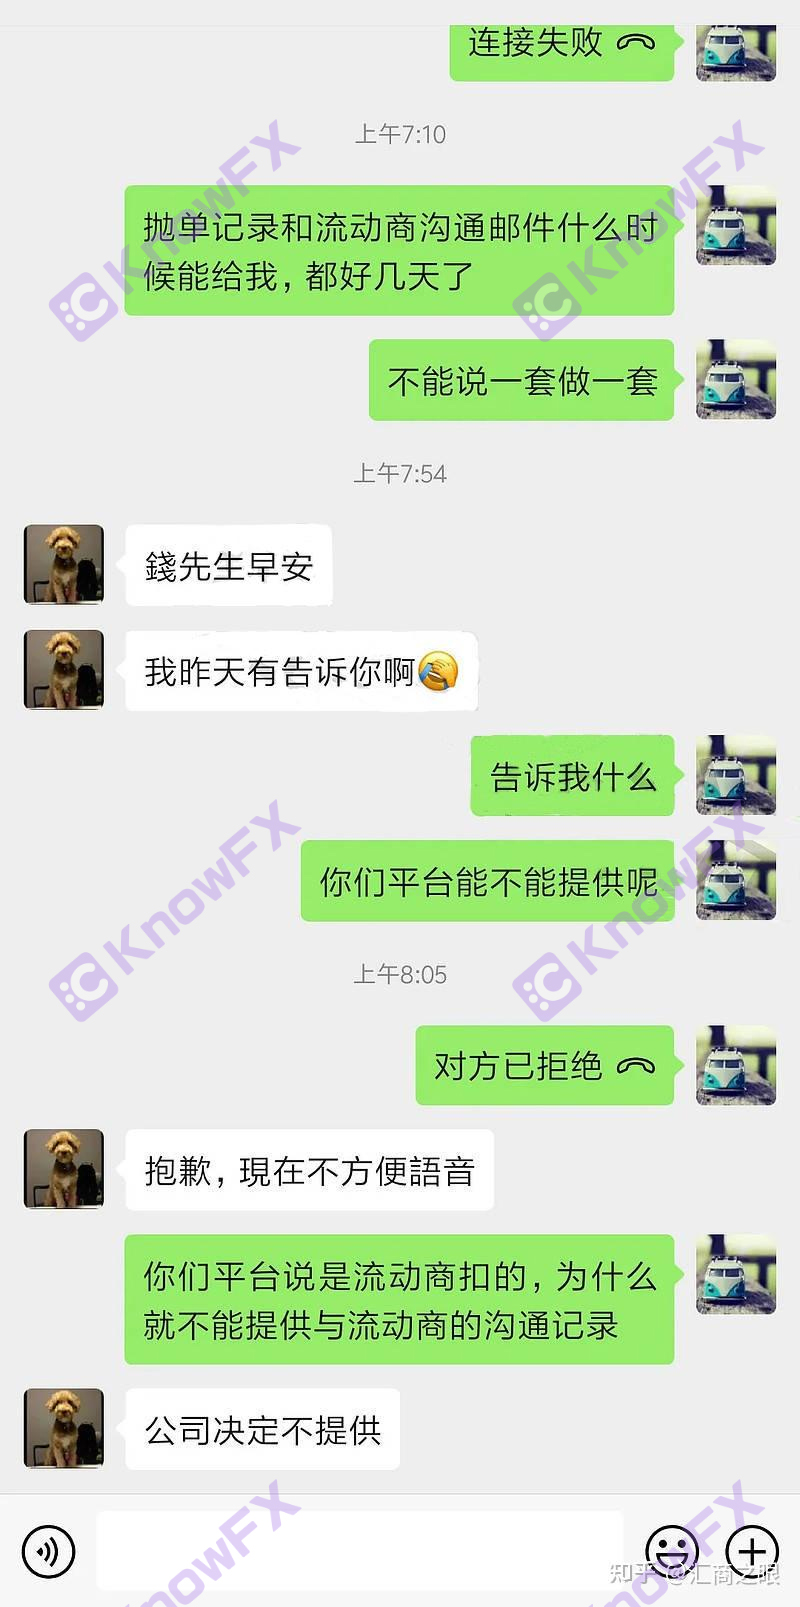 FXTRADING Galen foreign exchange has no effective supervision at all, scam investors' hard -earned money, and a large number of complaints are not handled!-第2张图片-要懂汇圈网